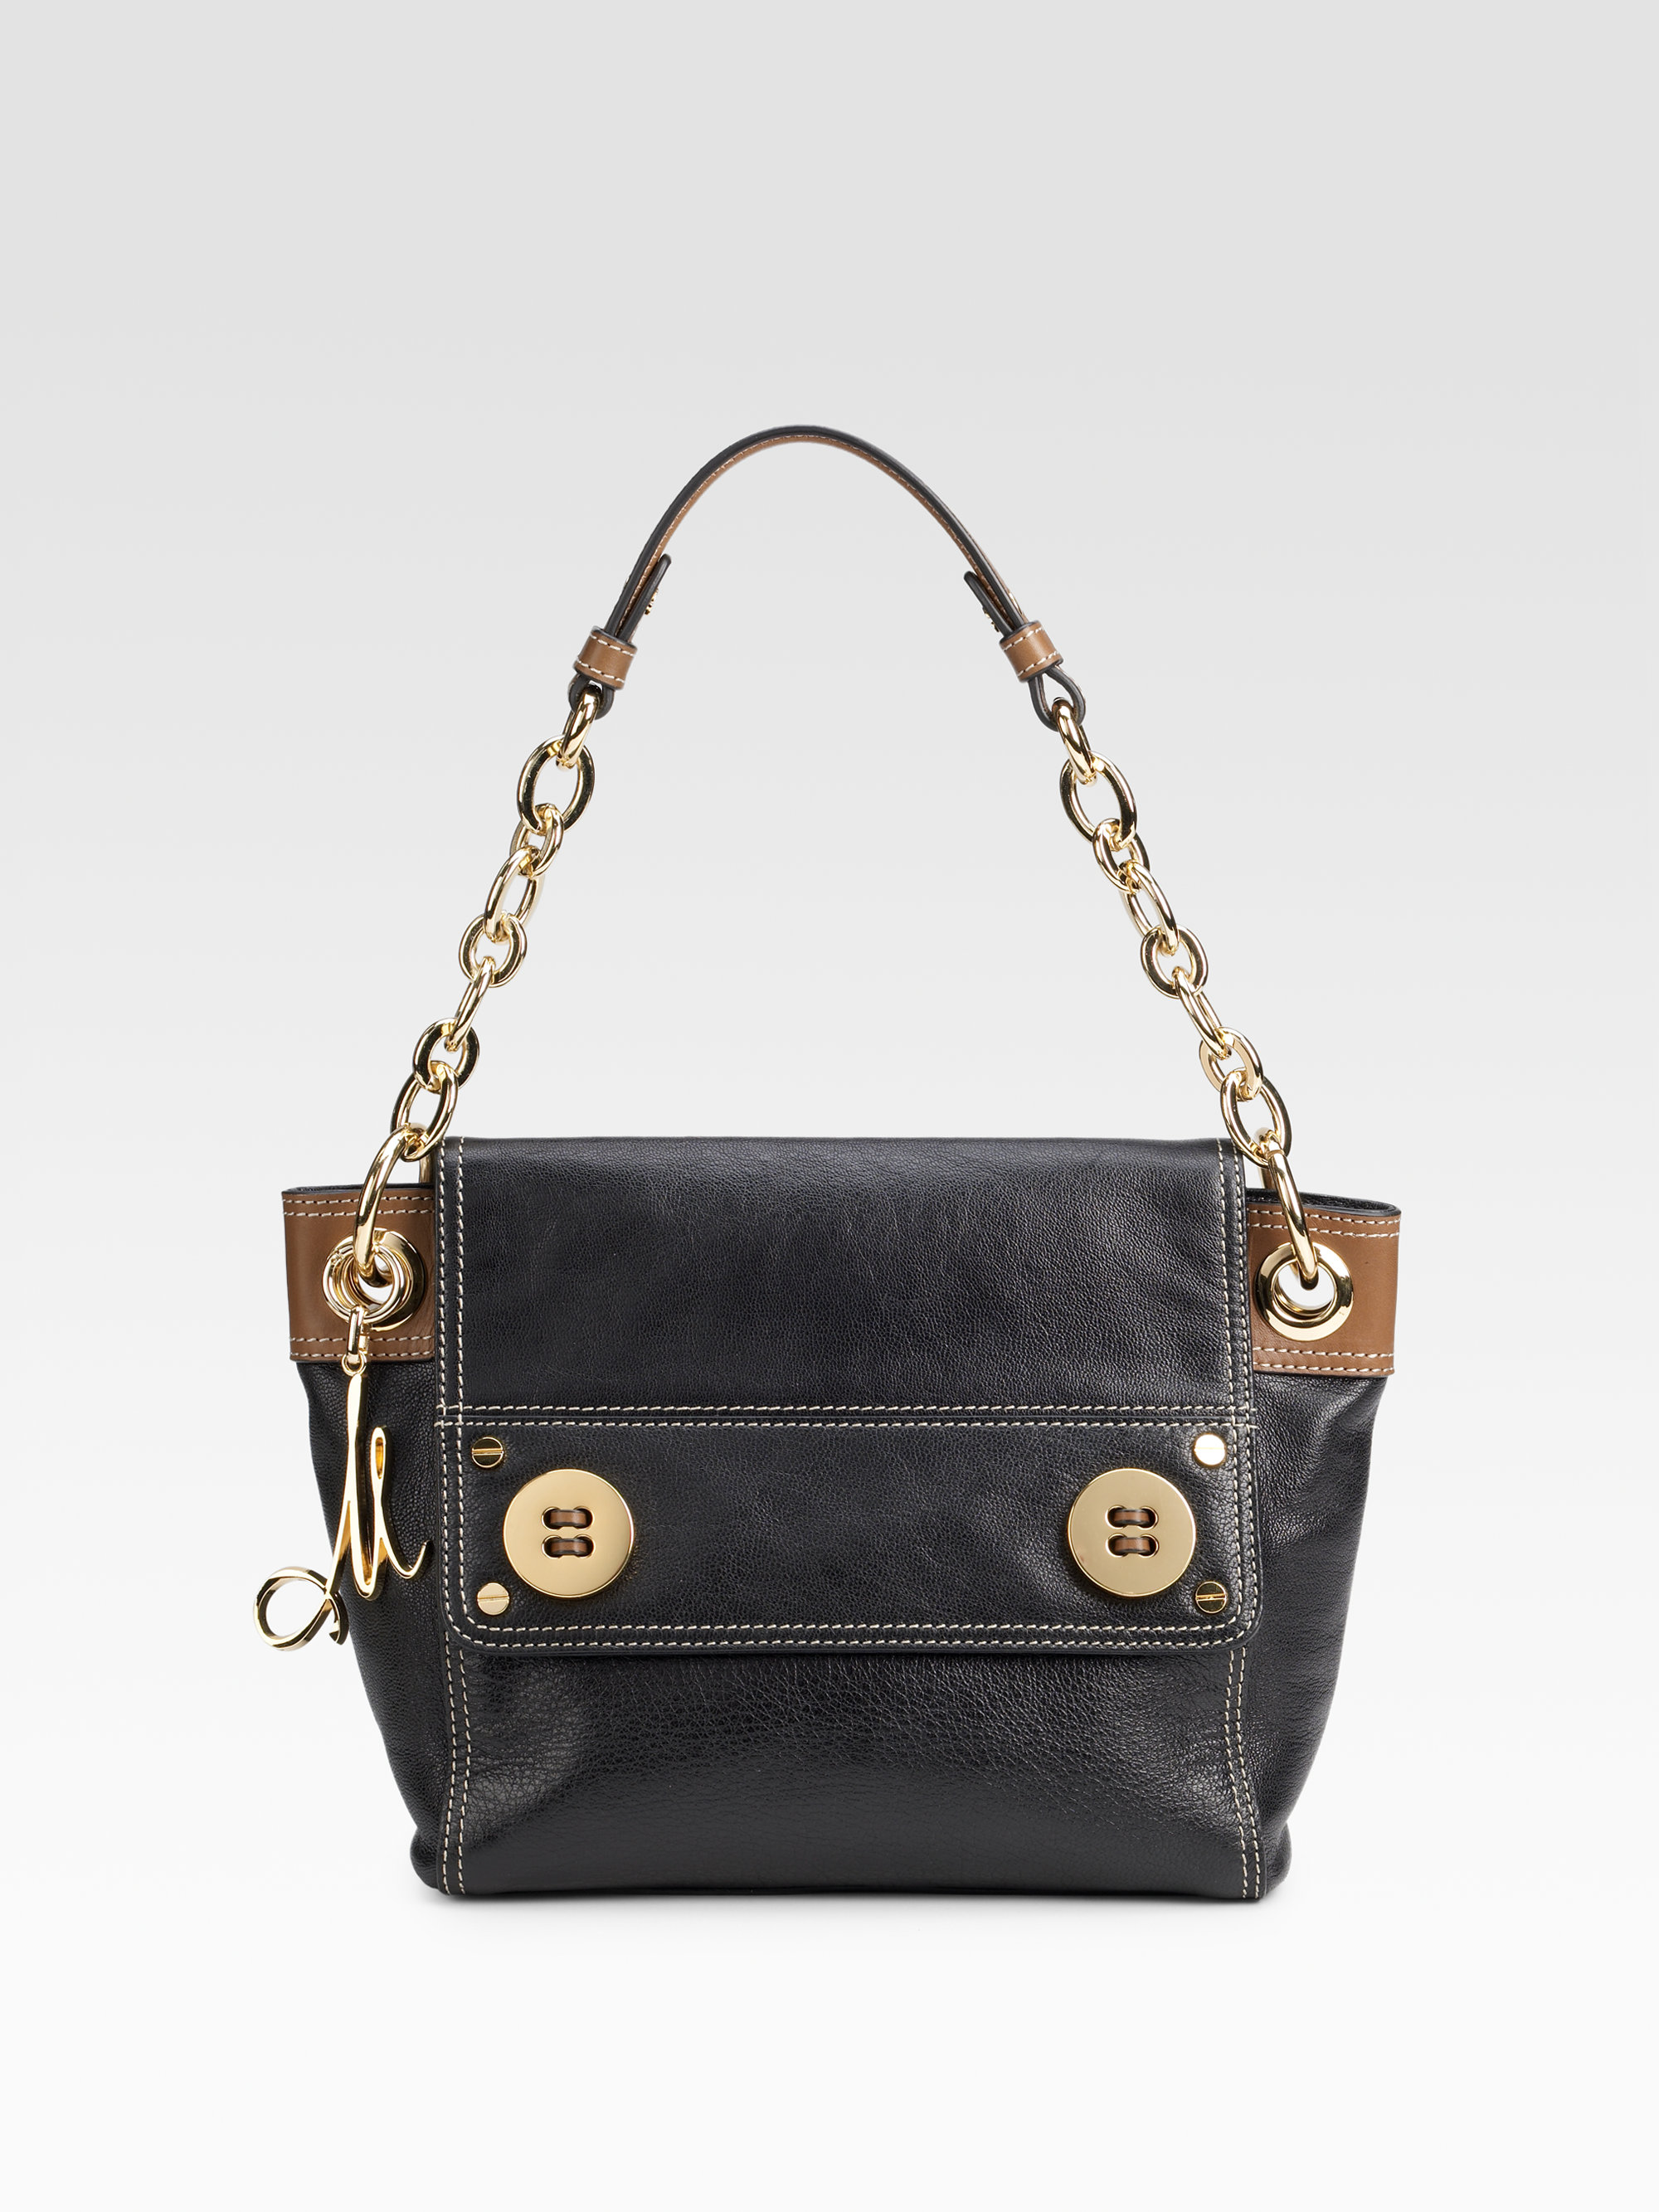 Milly Small Leather Shoulder Bag in Black | Lyst